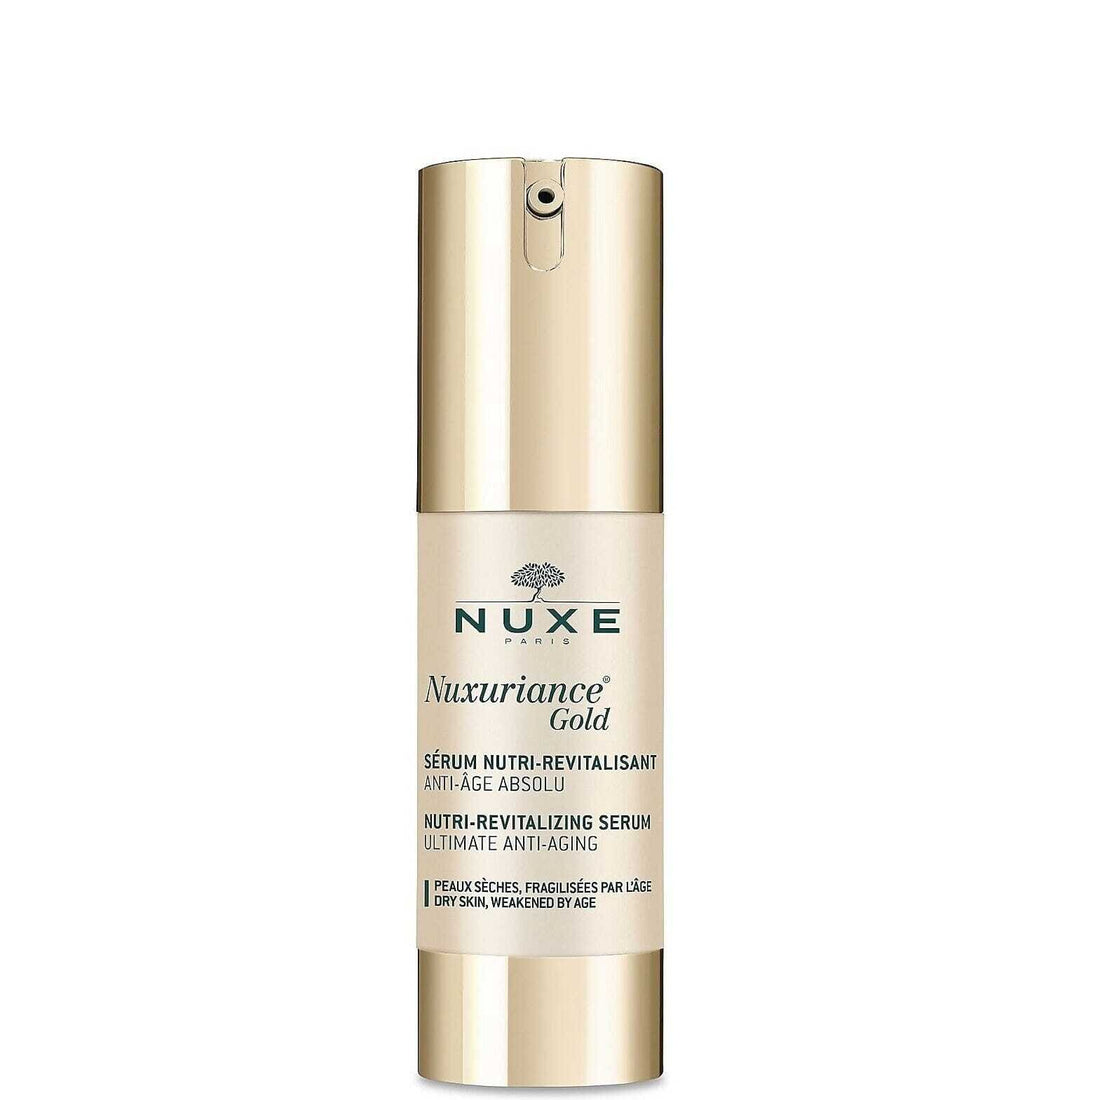 Nuxe Nuxuriance Gold Nutri-Replenishing Serum Nuxe 30 ml Shop at Skin Type Solutions